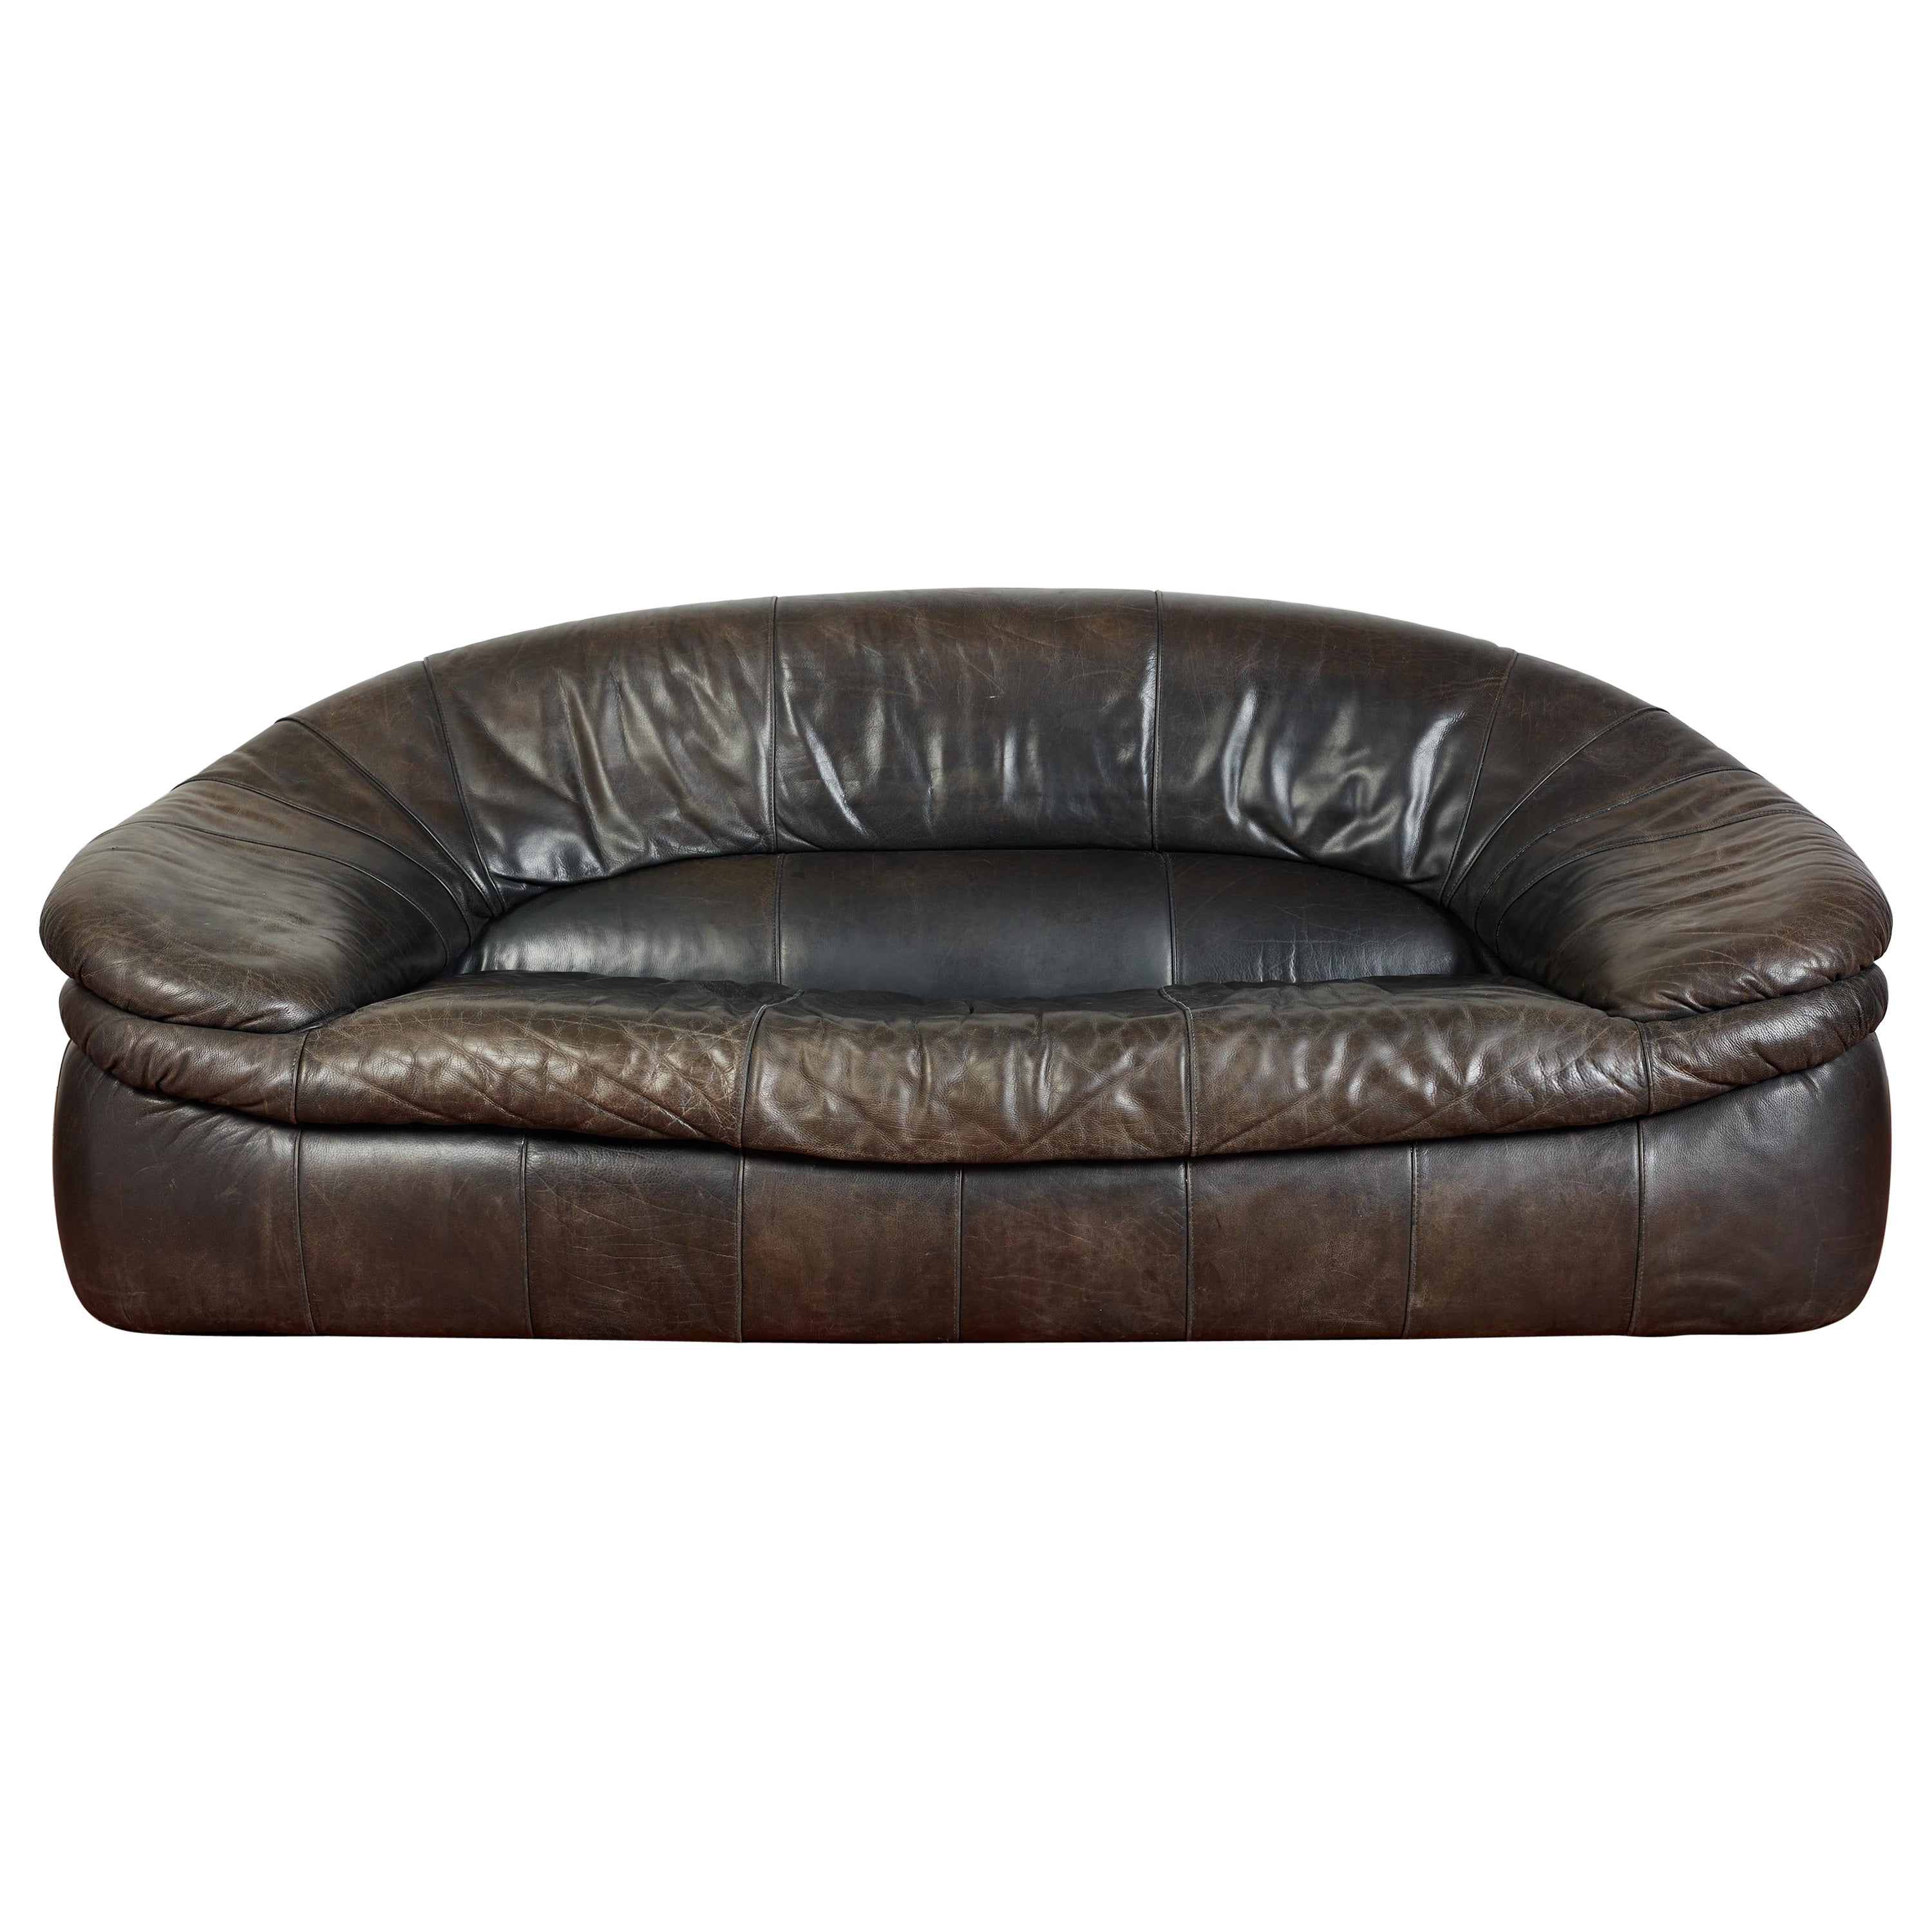 How do you rejuvenate an old leather couch?